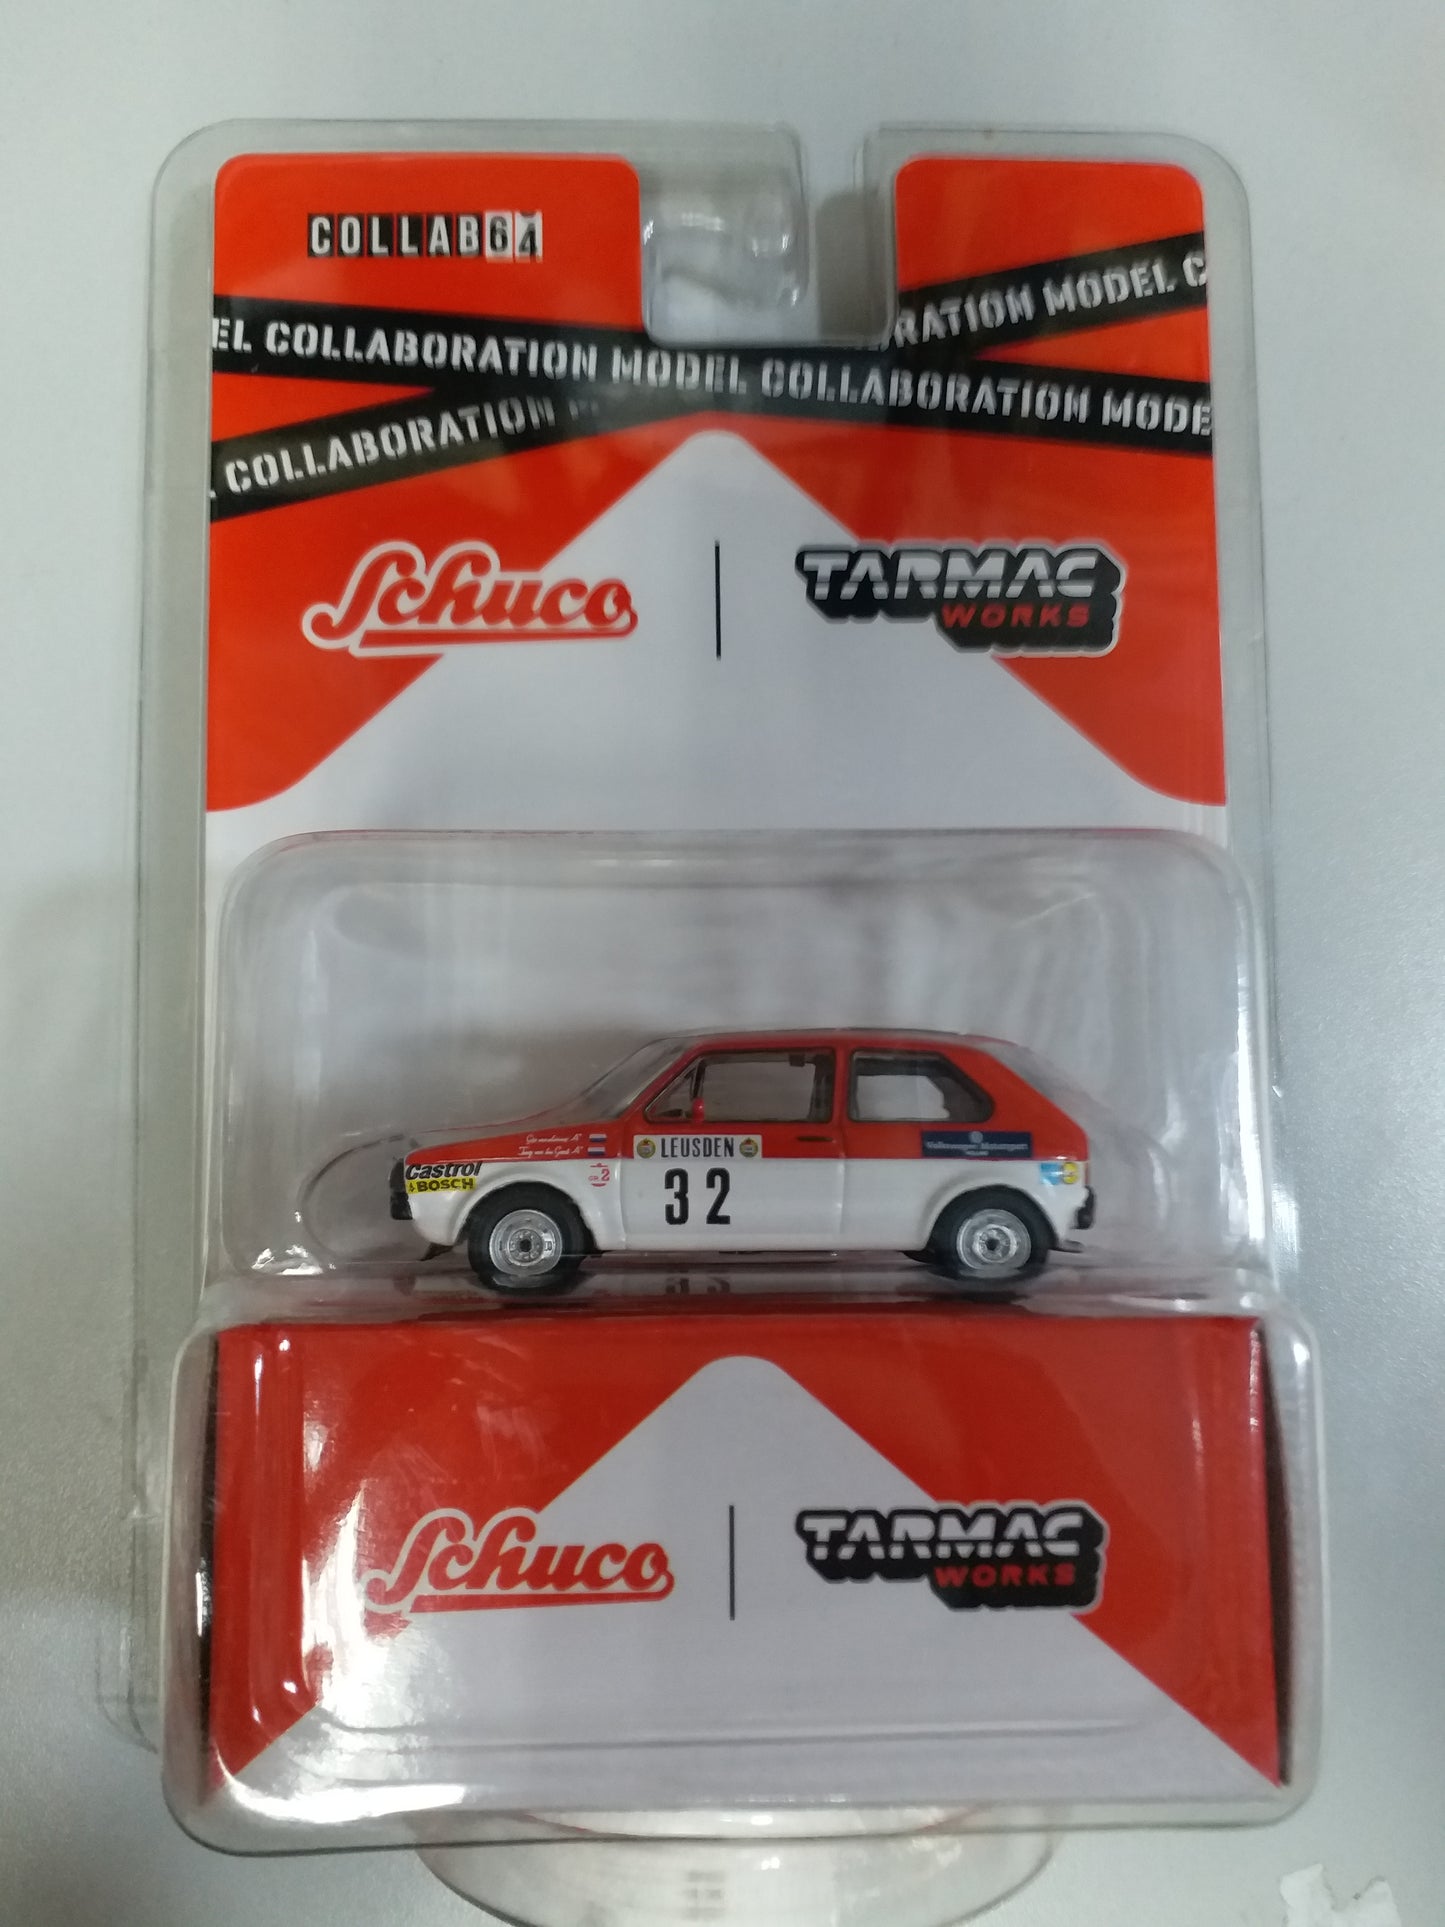 Tarmac works x Schuco 1:64 Scale Volkswagen Golf I GTI Rally Monte Carlo 1980 Decal included